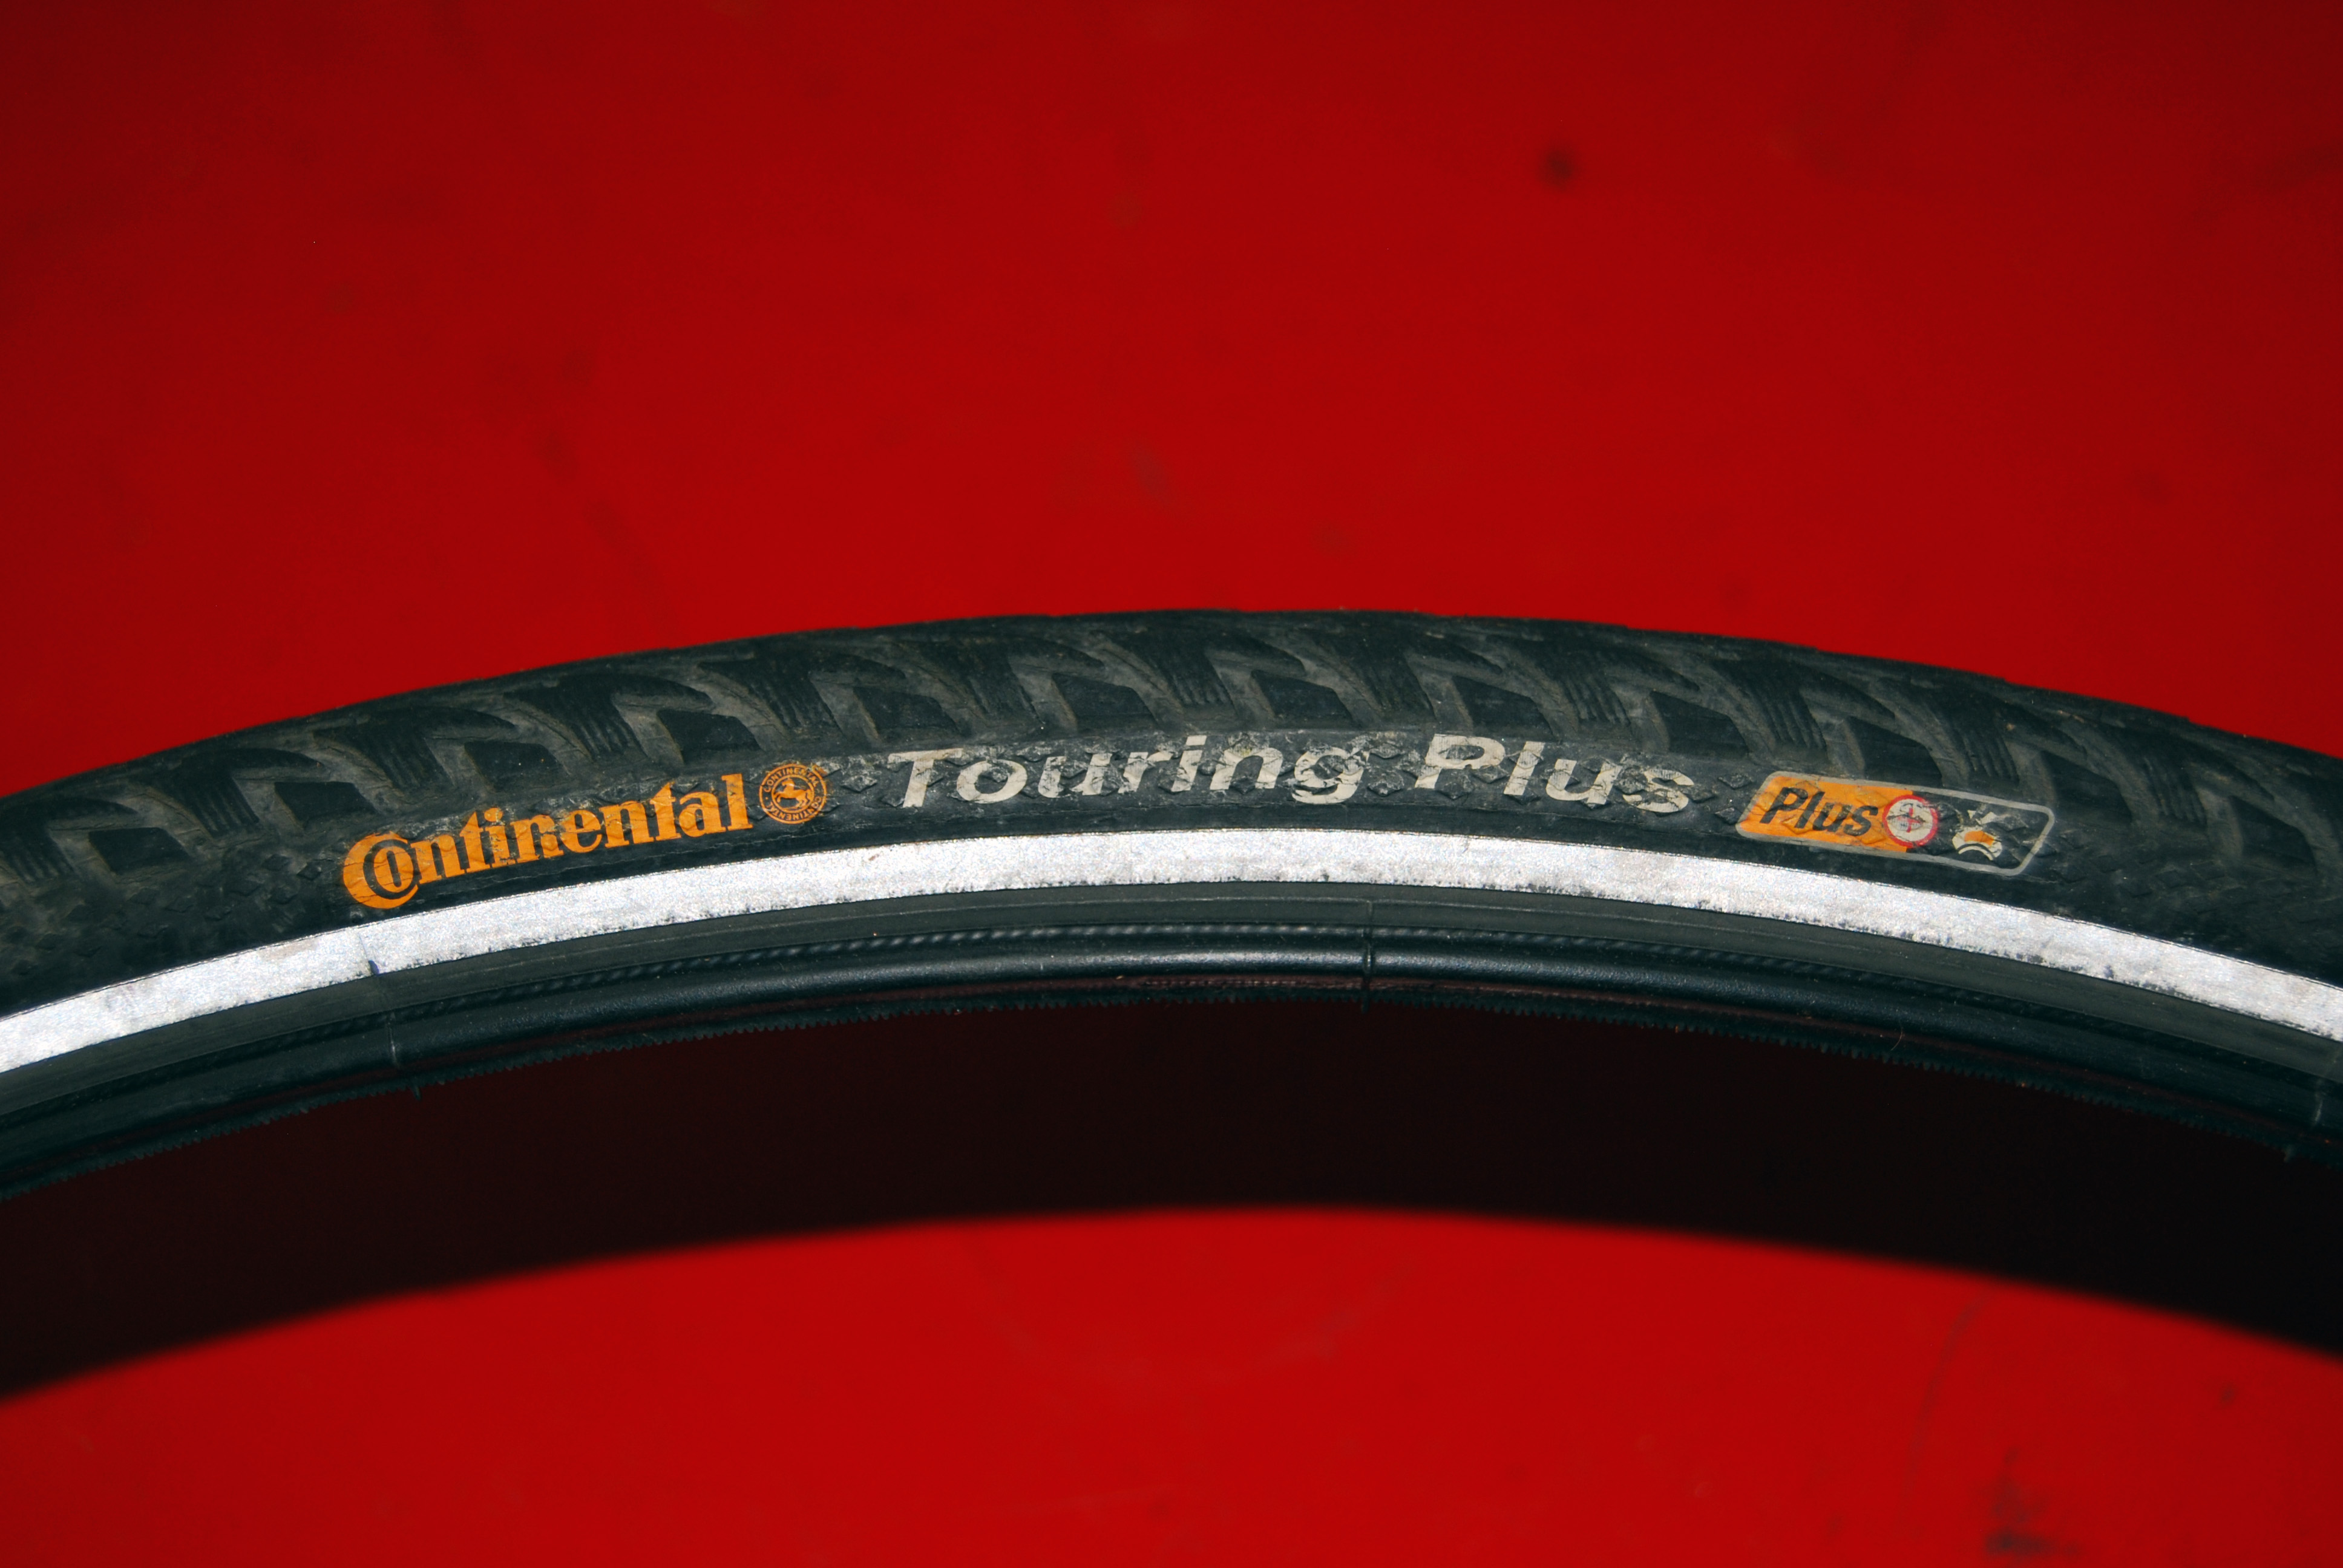 Continental Touring Plus Tire